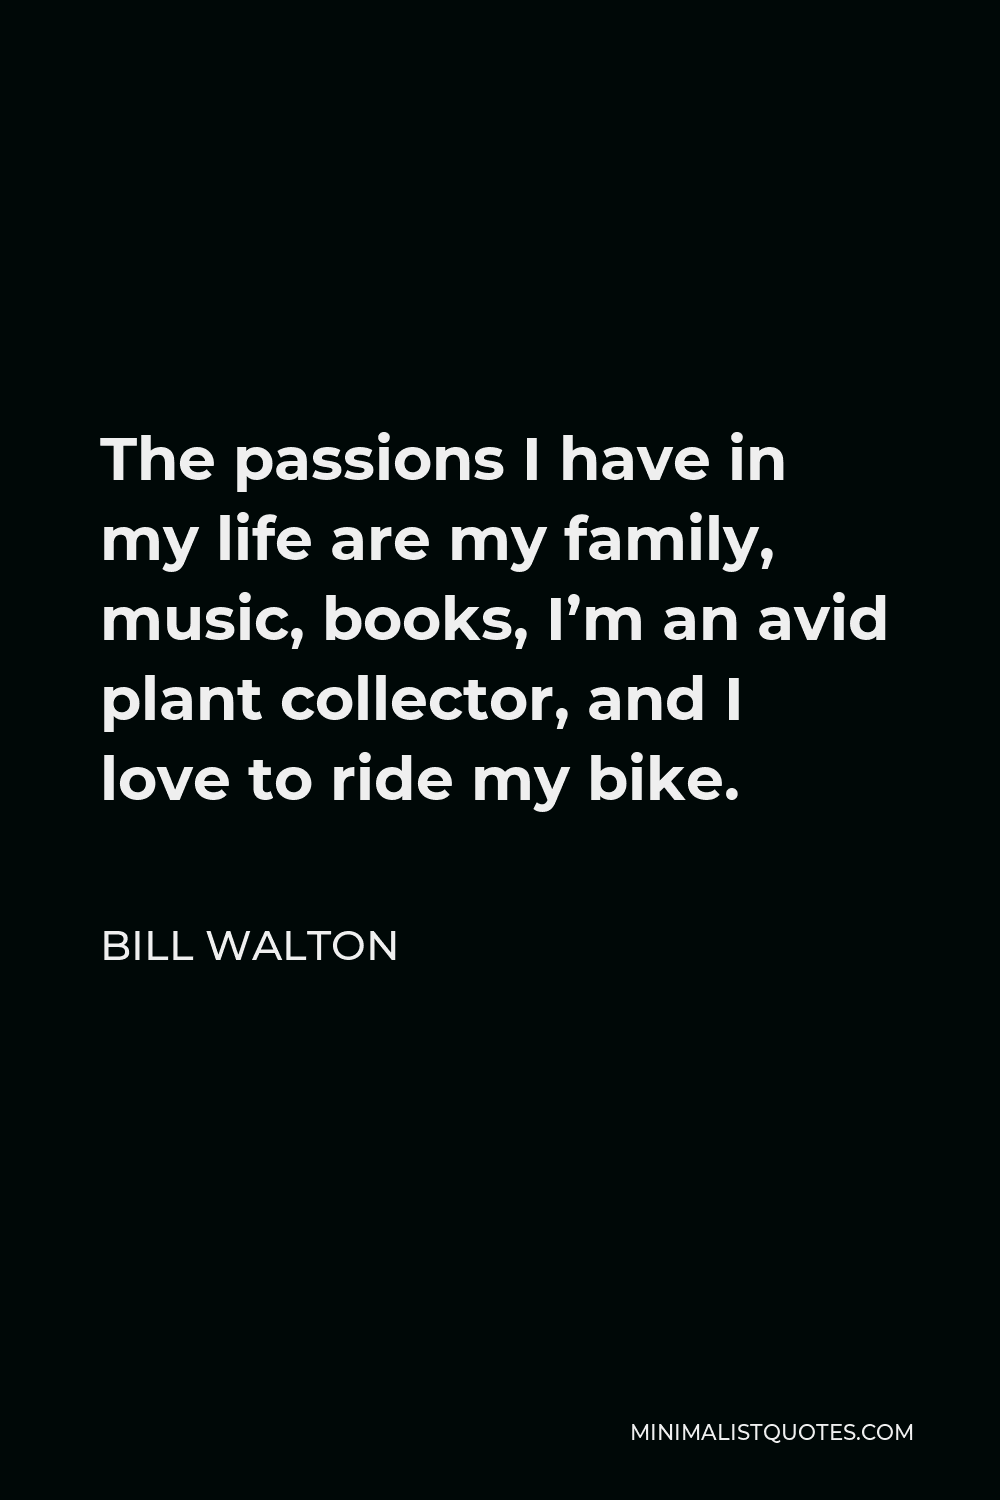 Bill Walton Quote - The passions I have in my life are my family, music, books, I’m an avid plant collector, and I love to ride my bike.